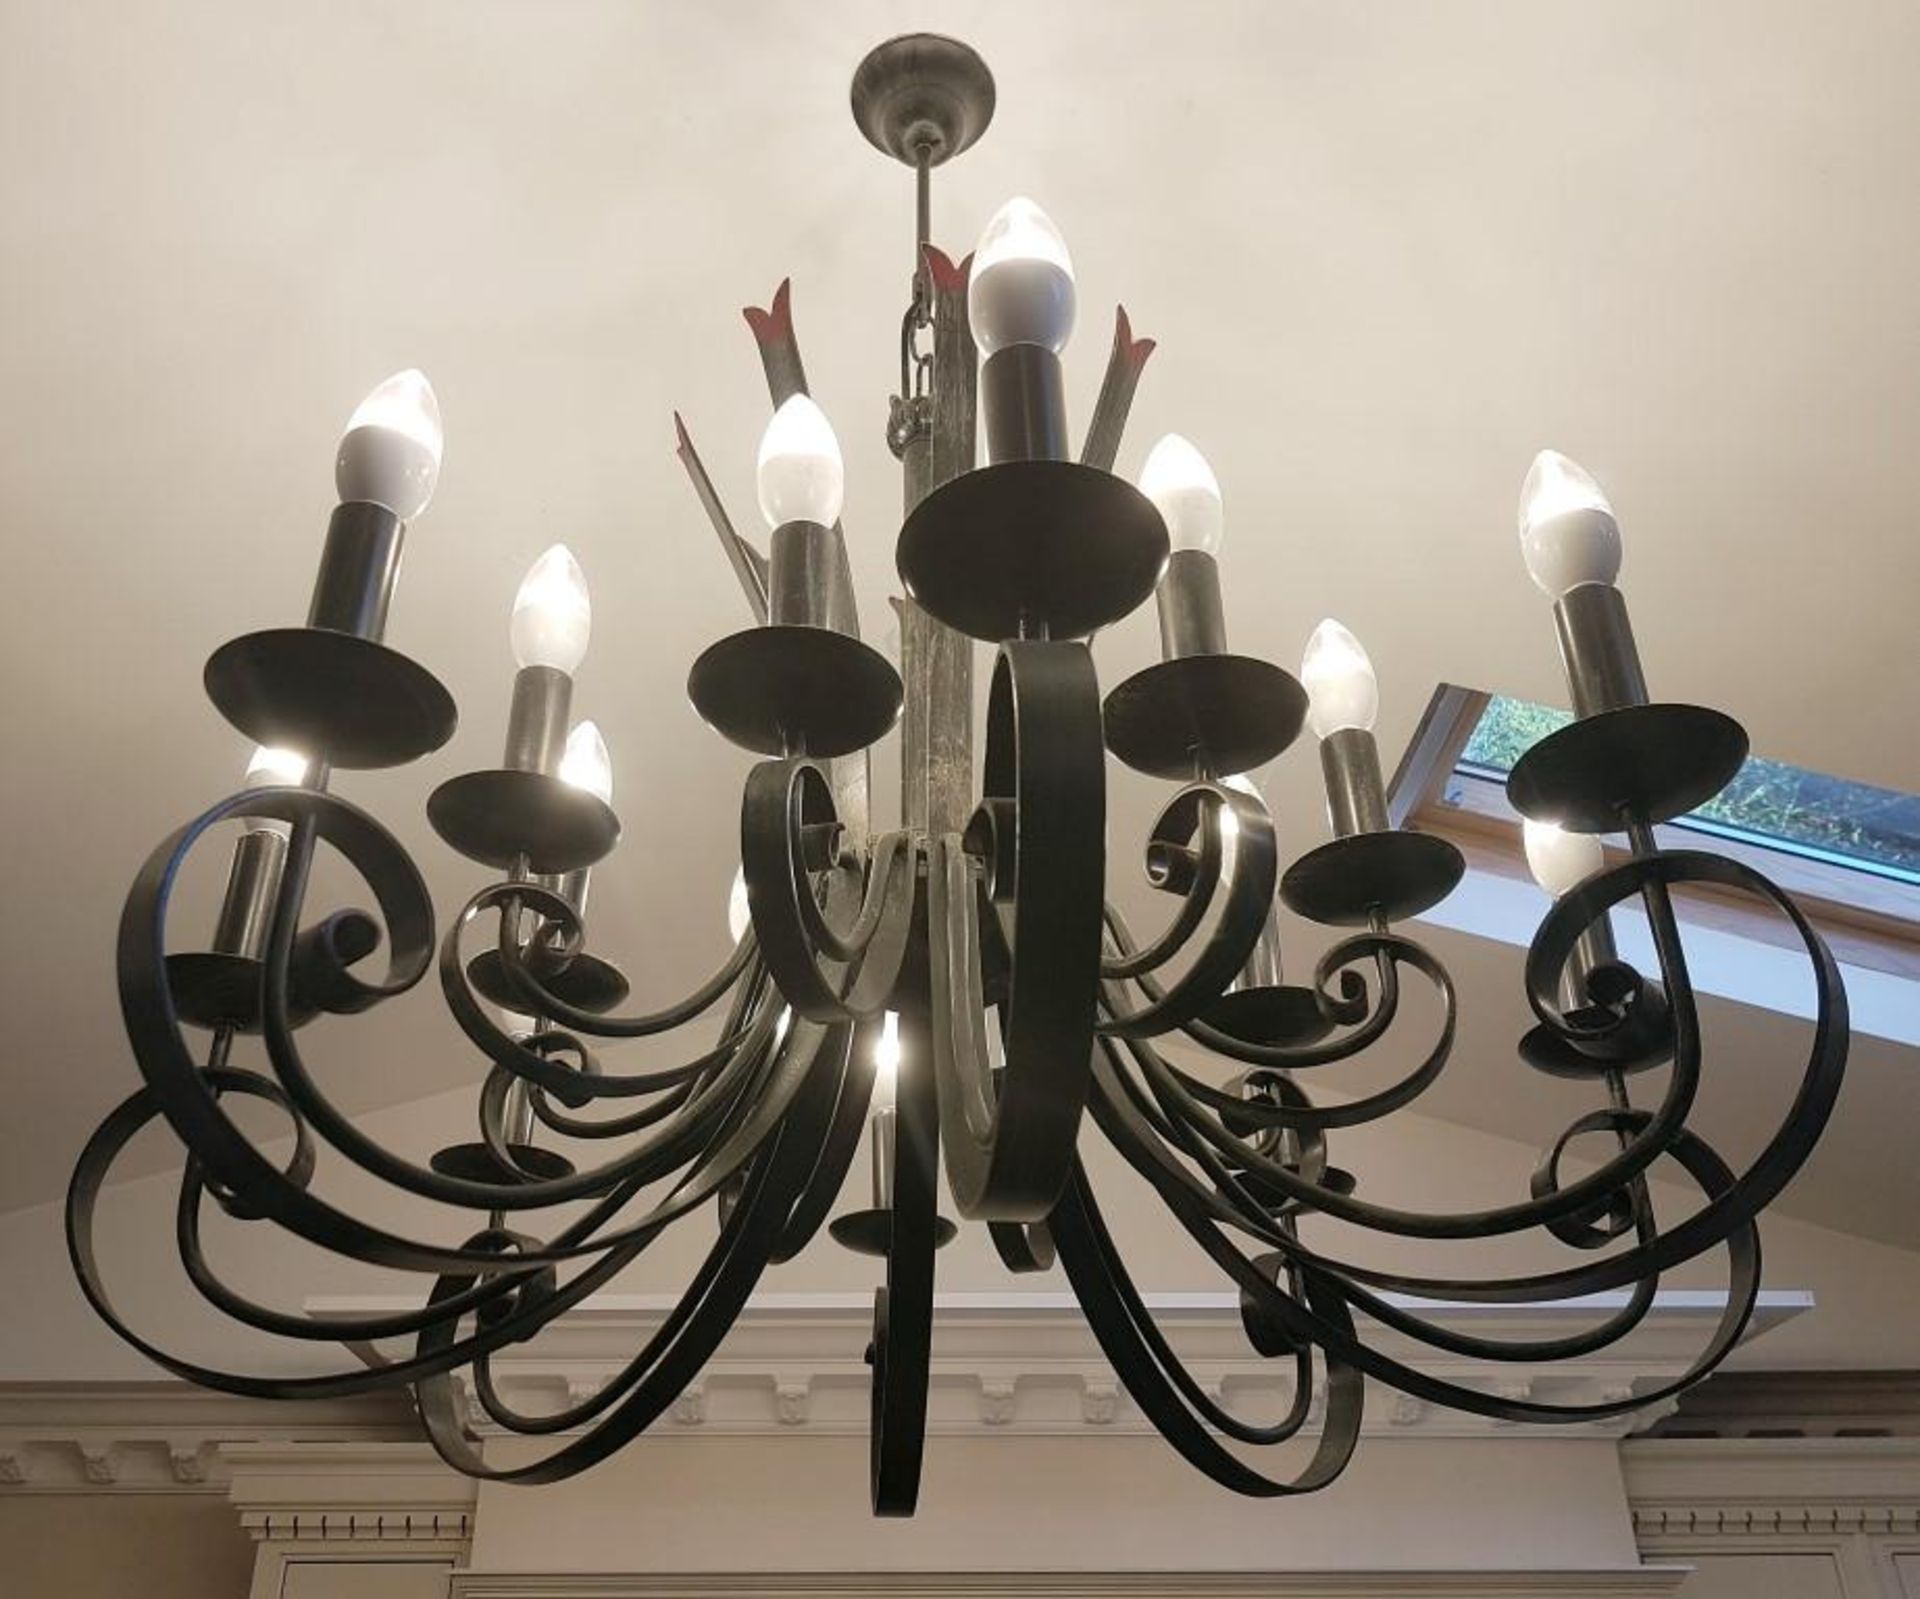 Impressive Bespoke 16-Sconce Wrought Iron Chandelier Light Fitting- CL266 - Used, In Very Good Condi - Image 3 of 4